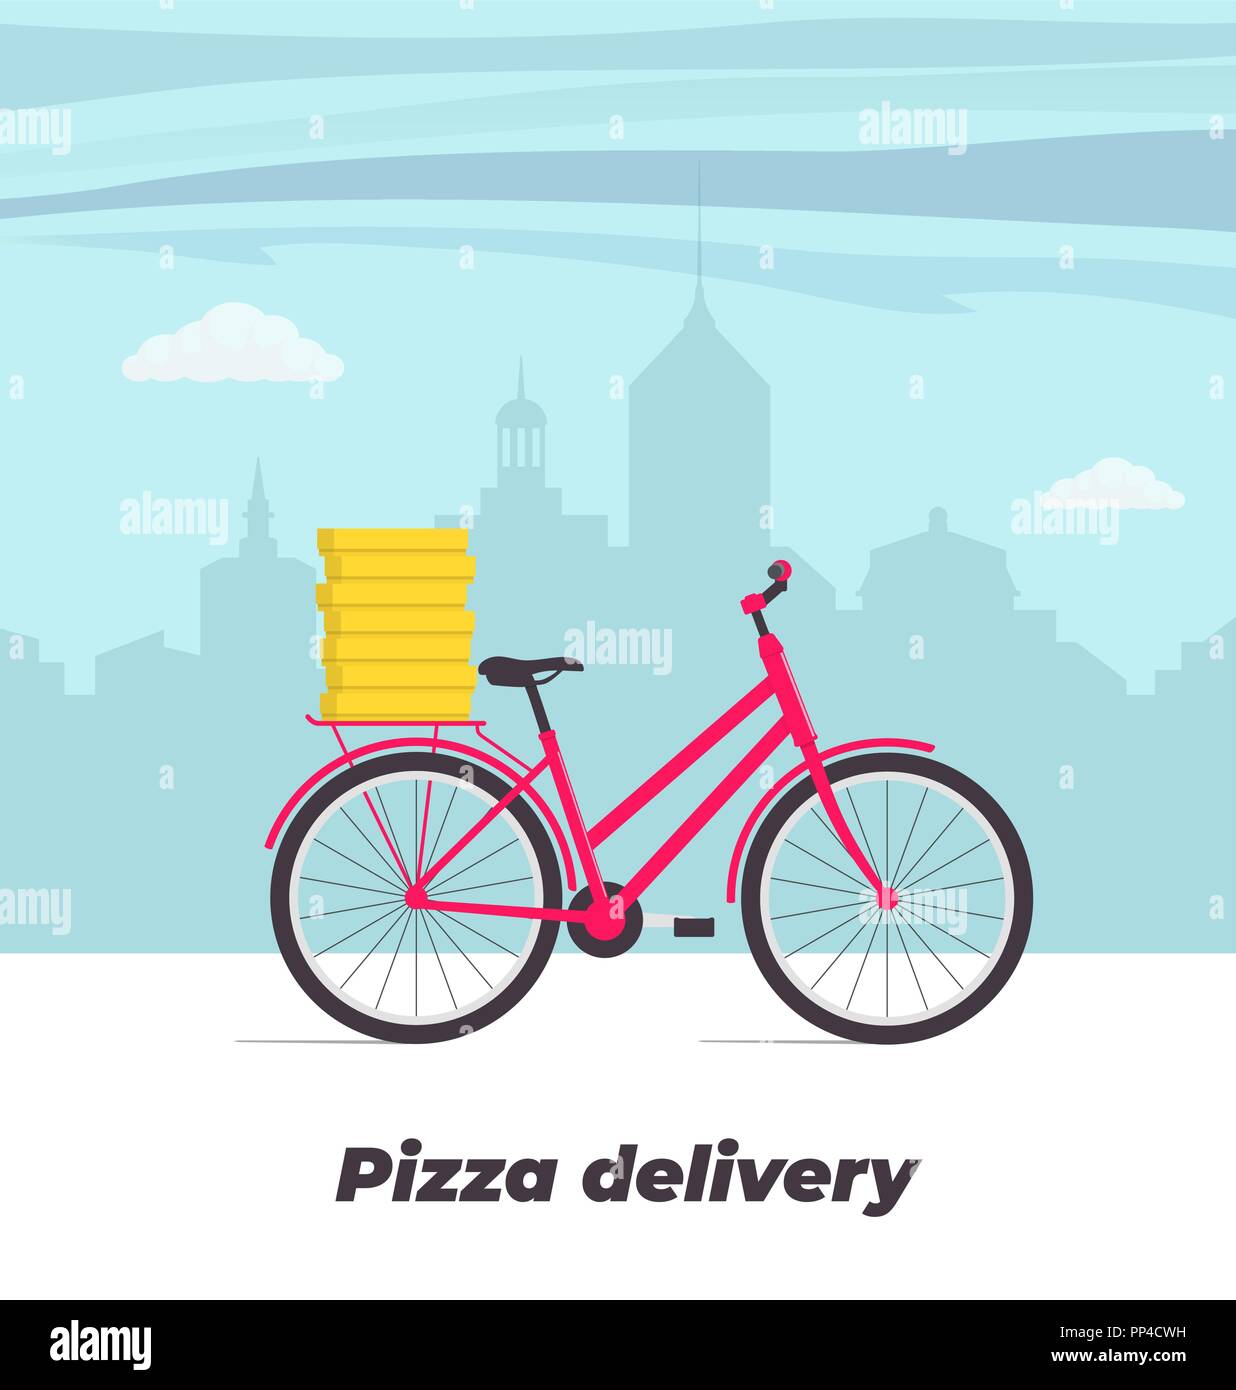 Pizza delivery service concept illustration. Bicycle with pizza boxes on the trunk. Big city on background. Vector flat illustration Stock Vector